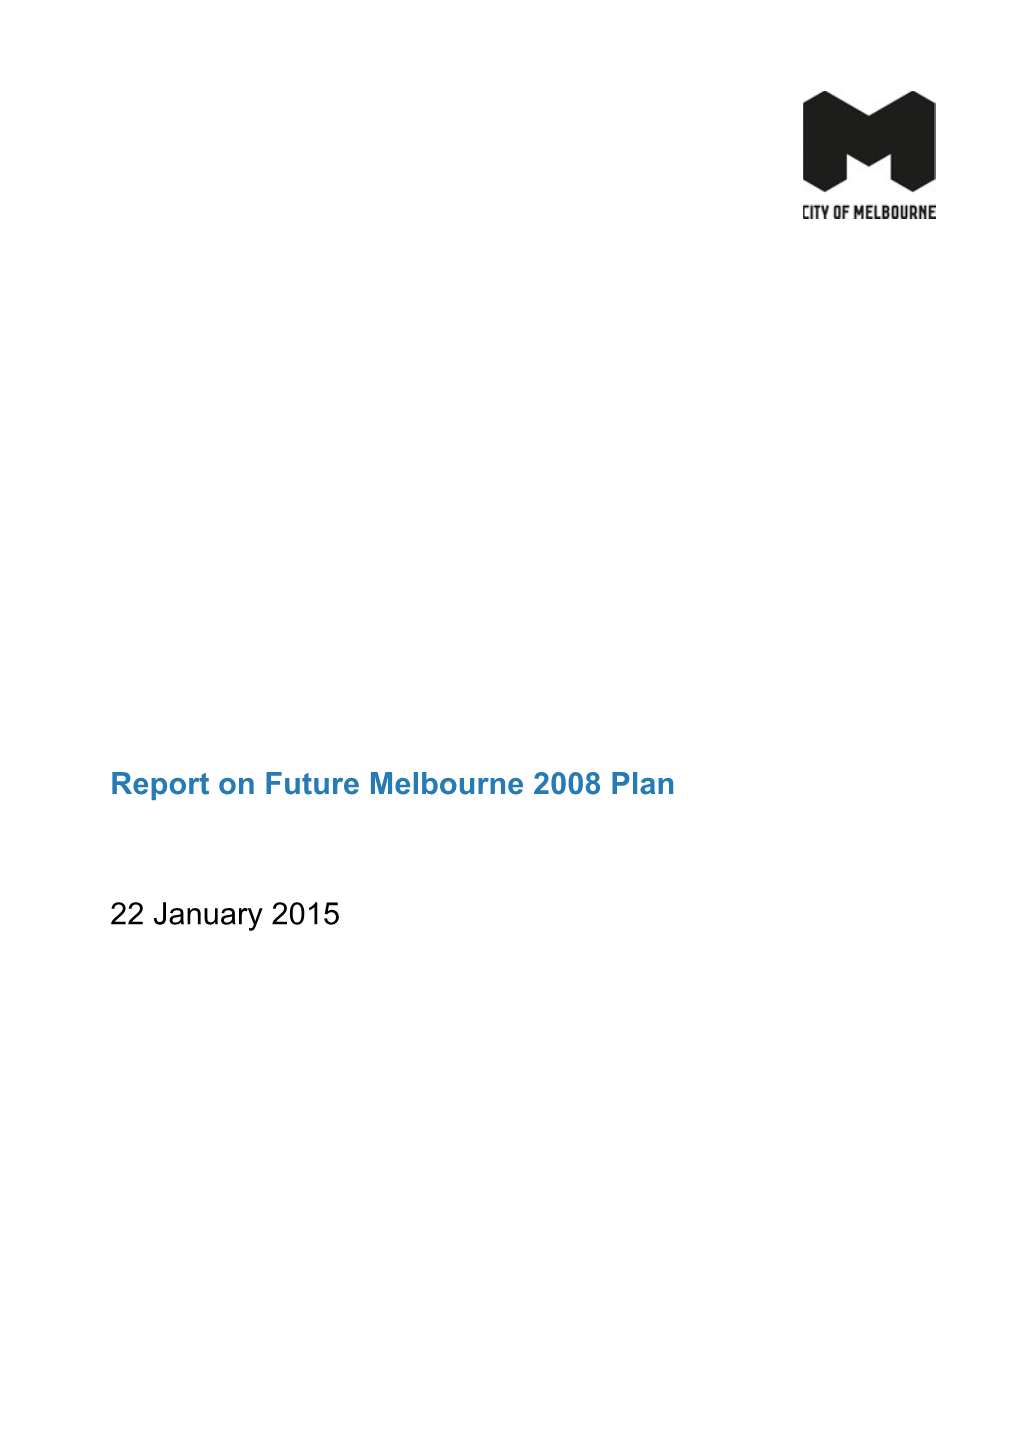 Report Onfuture Melbourne 2008 Plan